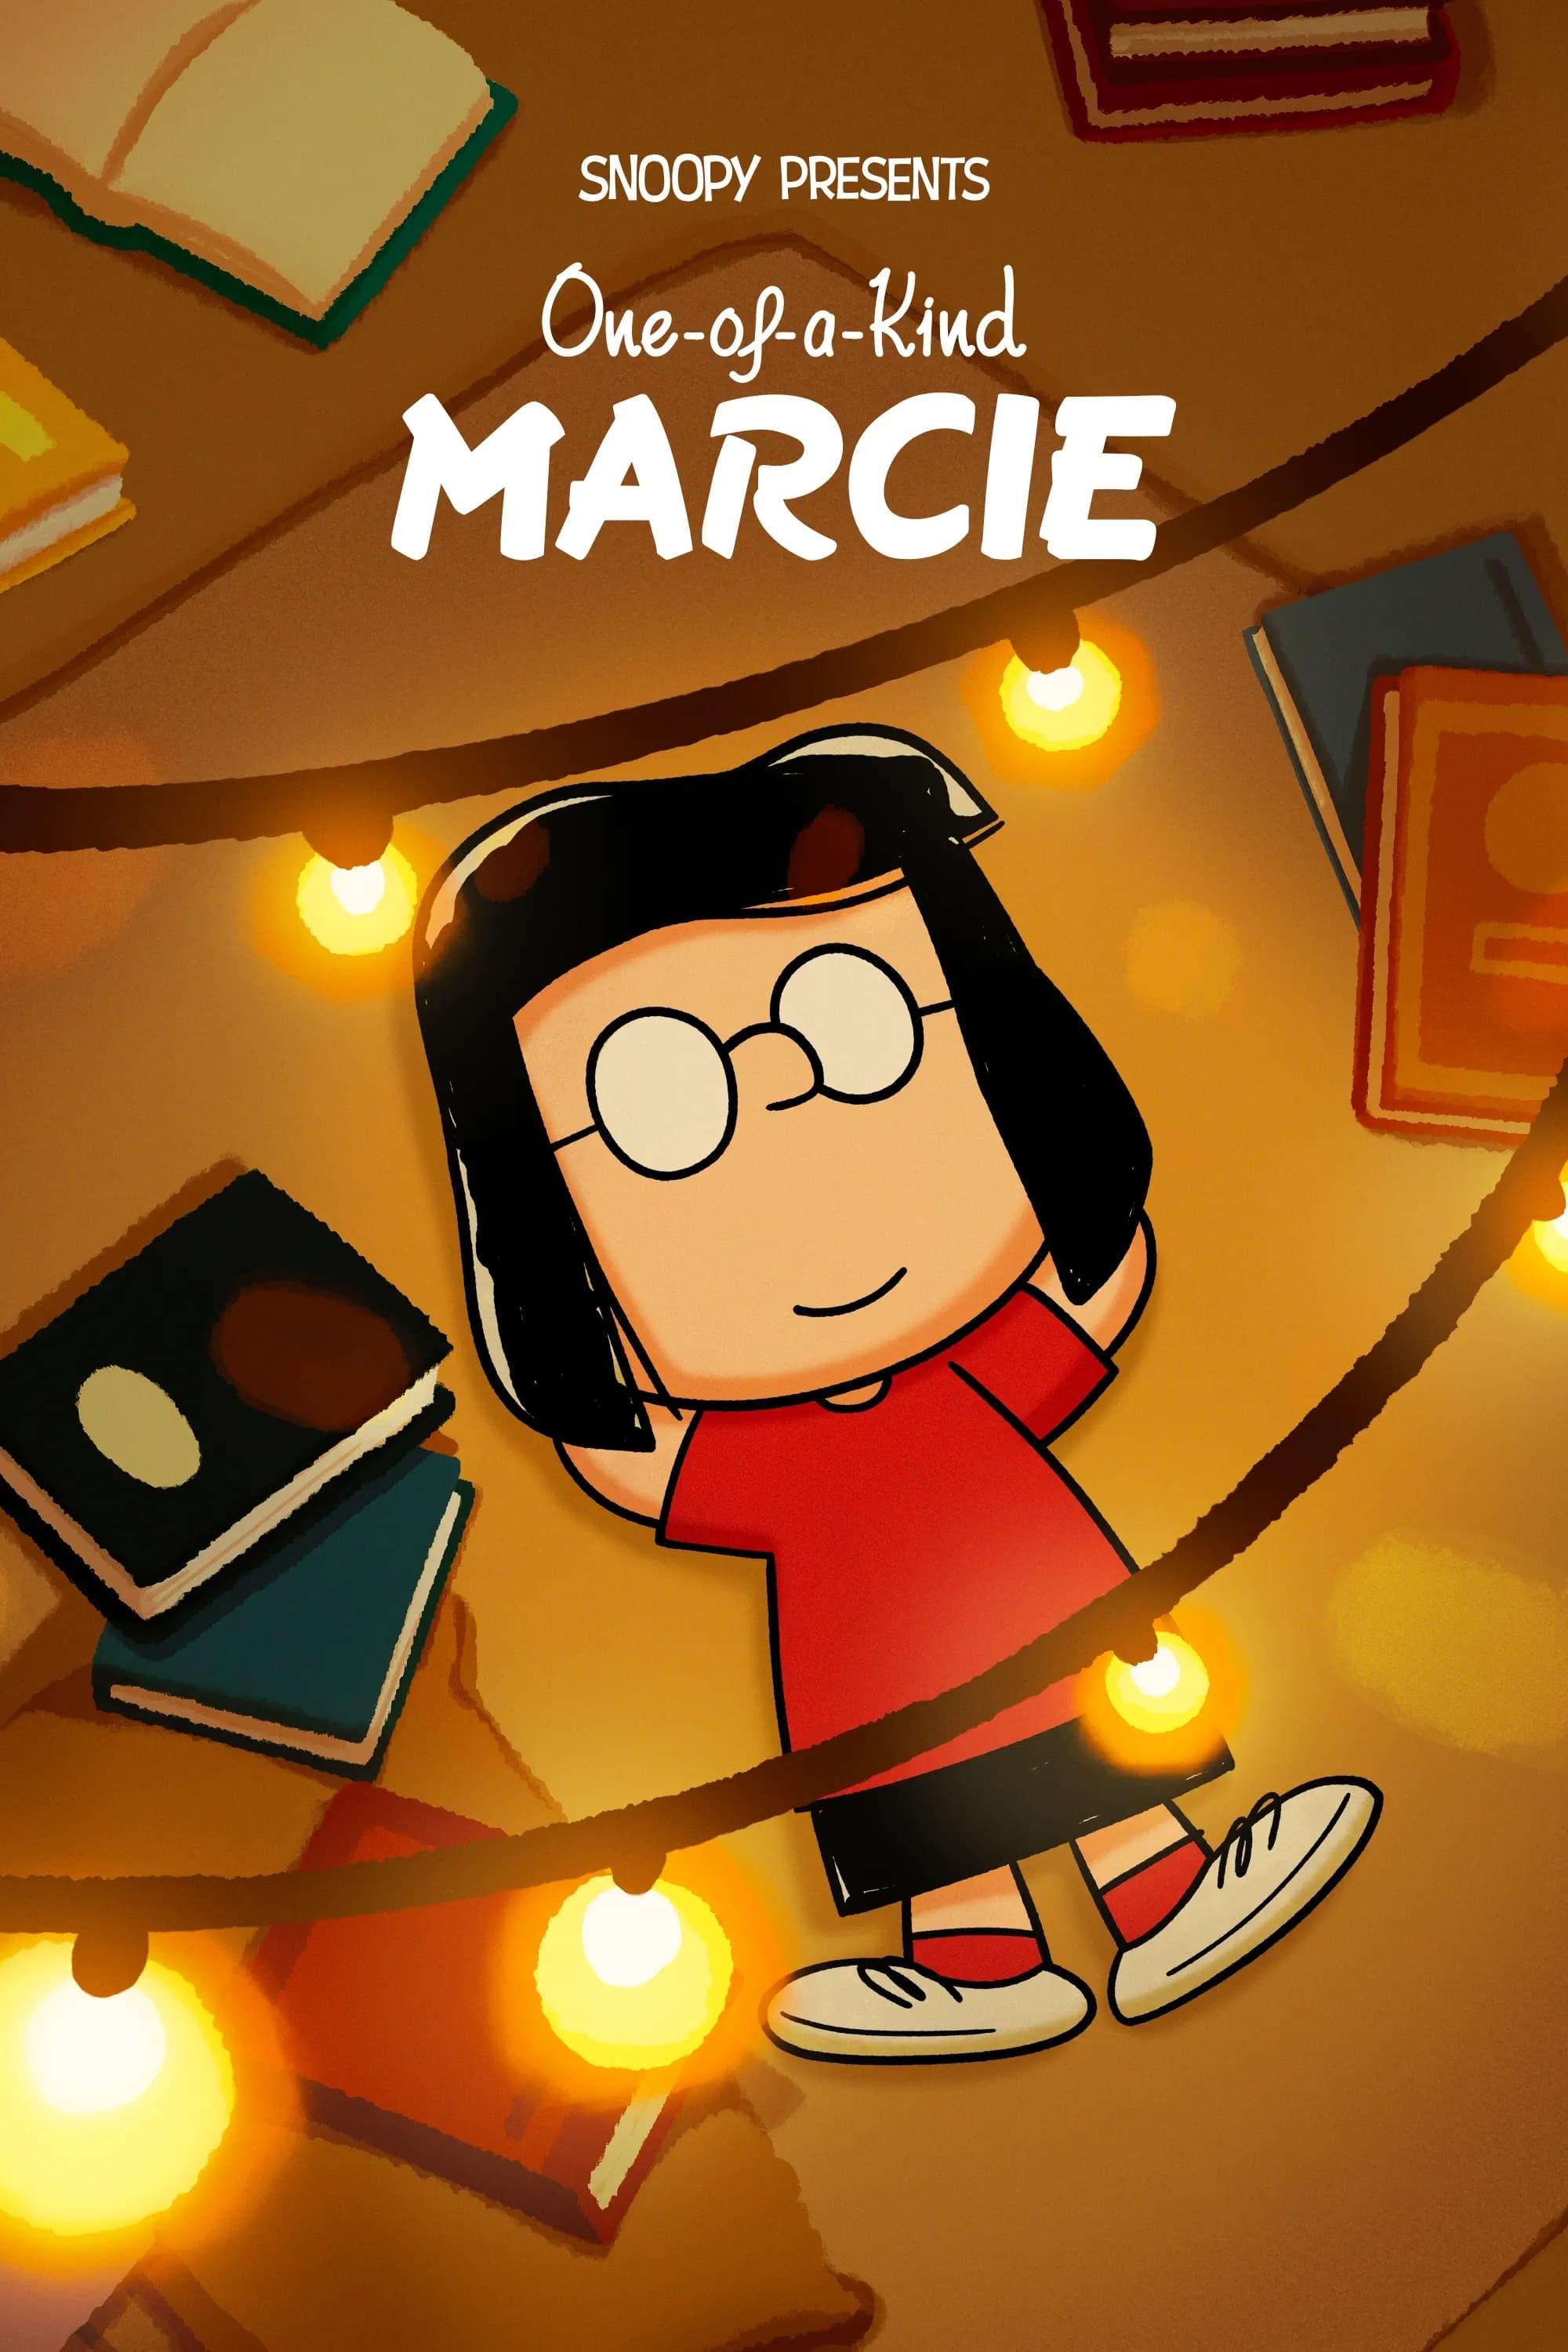 Snoopy Presents: One-of-a-Kind Marcie Image